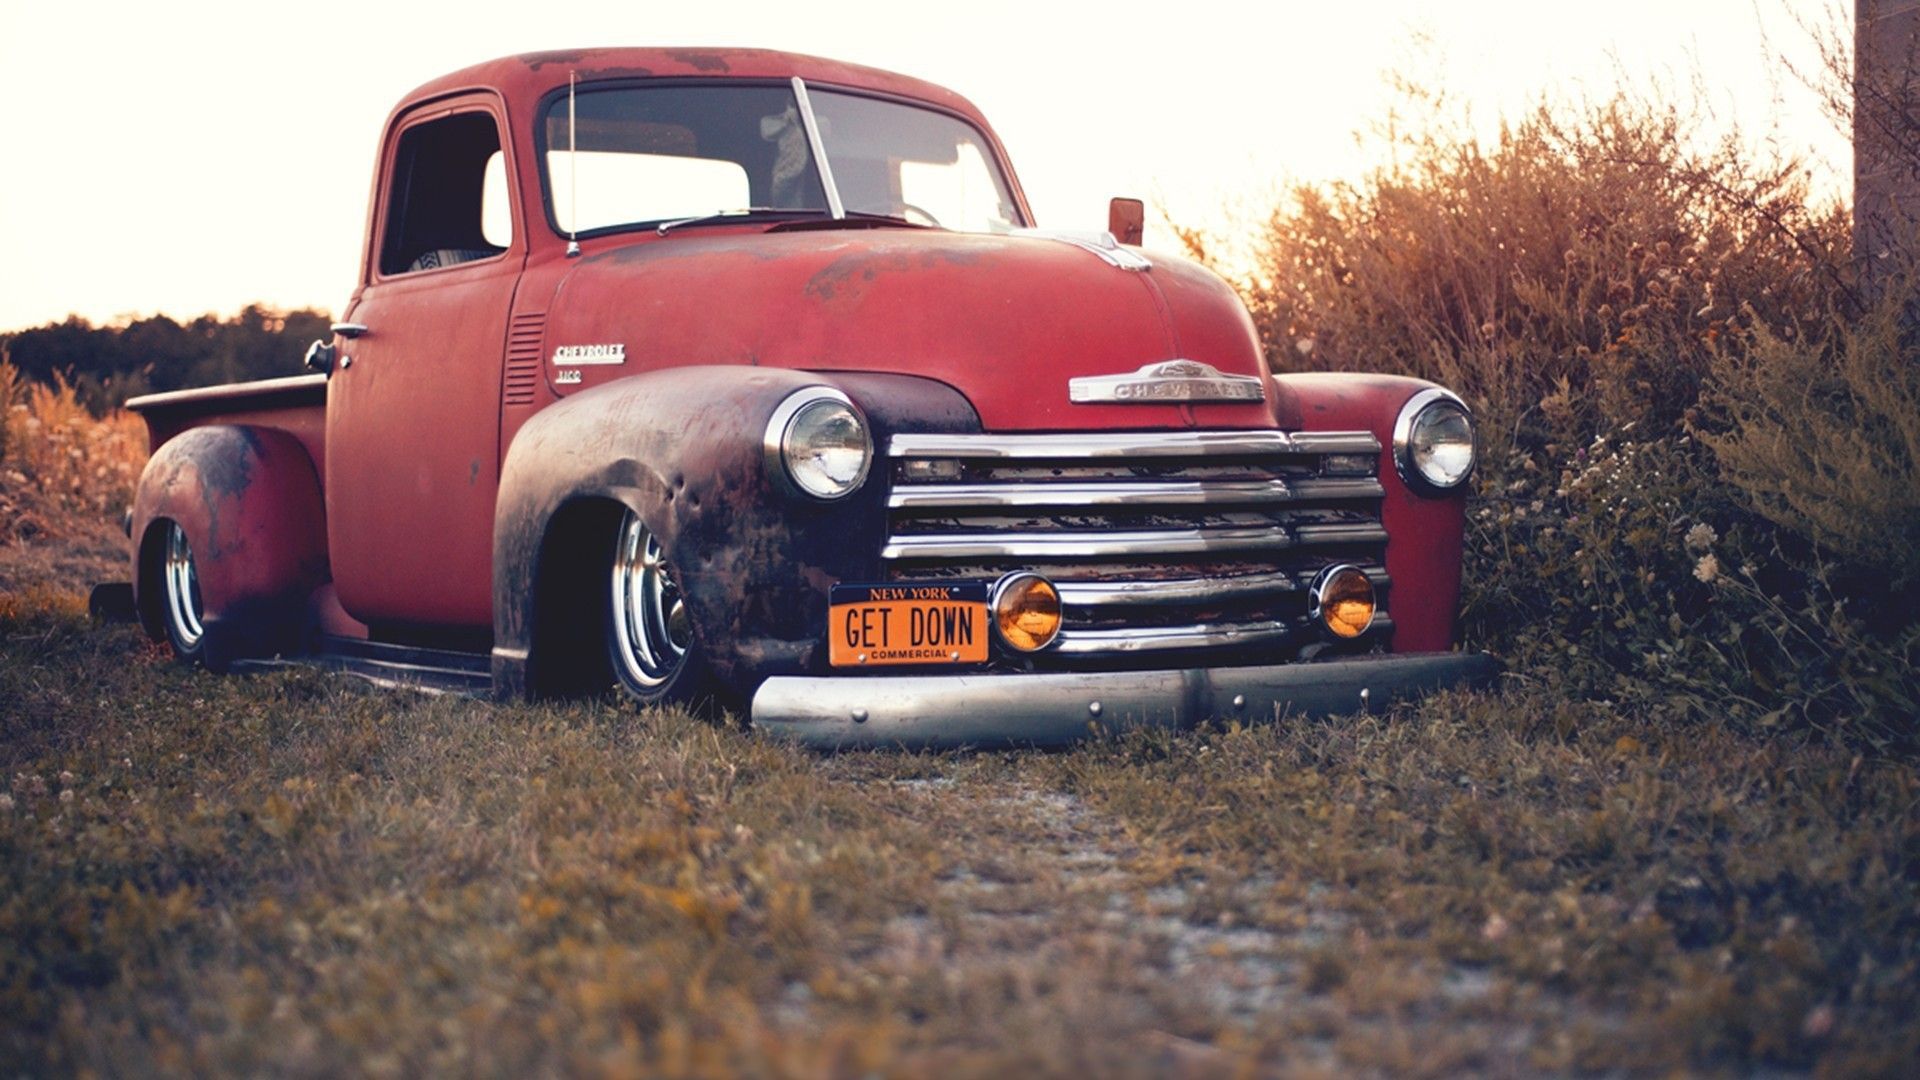 Old Gmc Truck Wallpapers 4k Hd Old Gmc Truck Backgrounds On Wallpaperbat